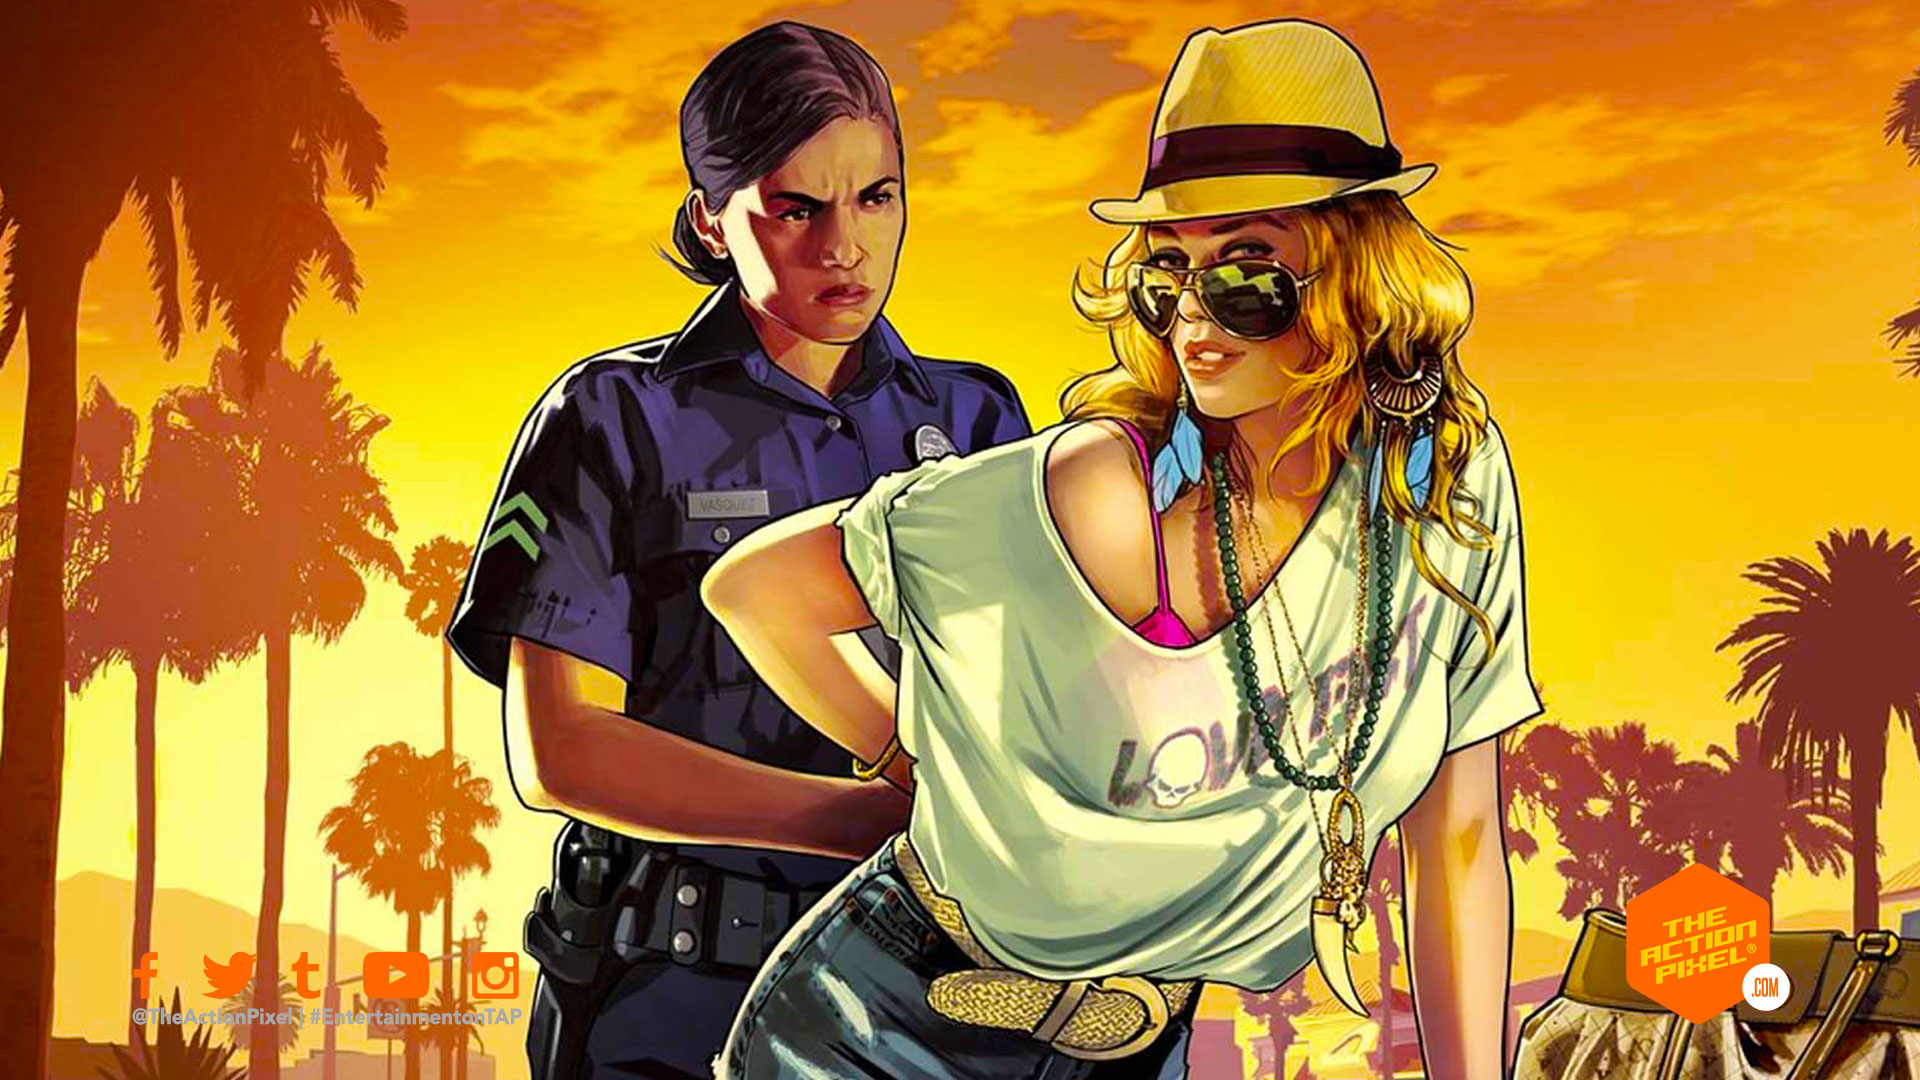 gta5, vice city, grand theft auto 6, grand theft auto, GTA, grand theft auto 6 leaks, GTA 6 leaks, GTA vi,gta vi leaks, rockstar games, entertainment on tap, the action pixel, bonnie and Clyde, Lucia,